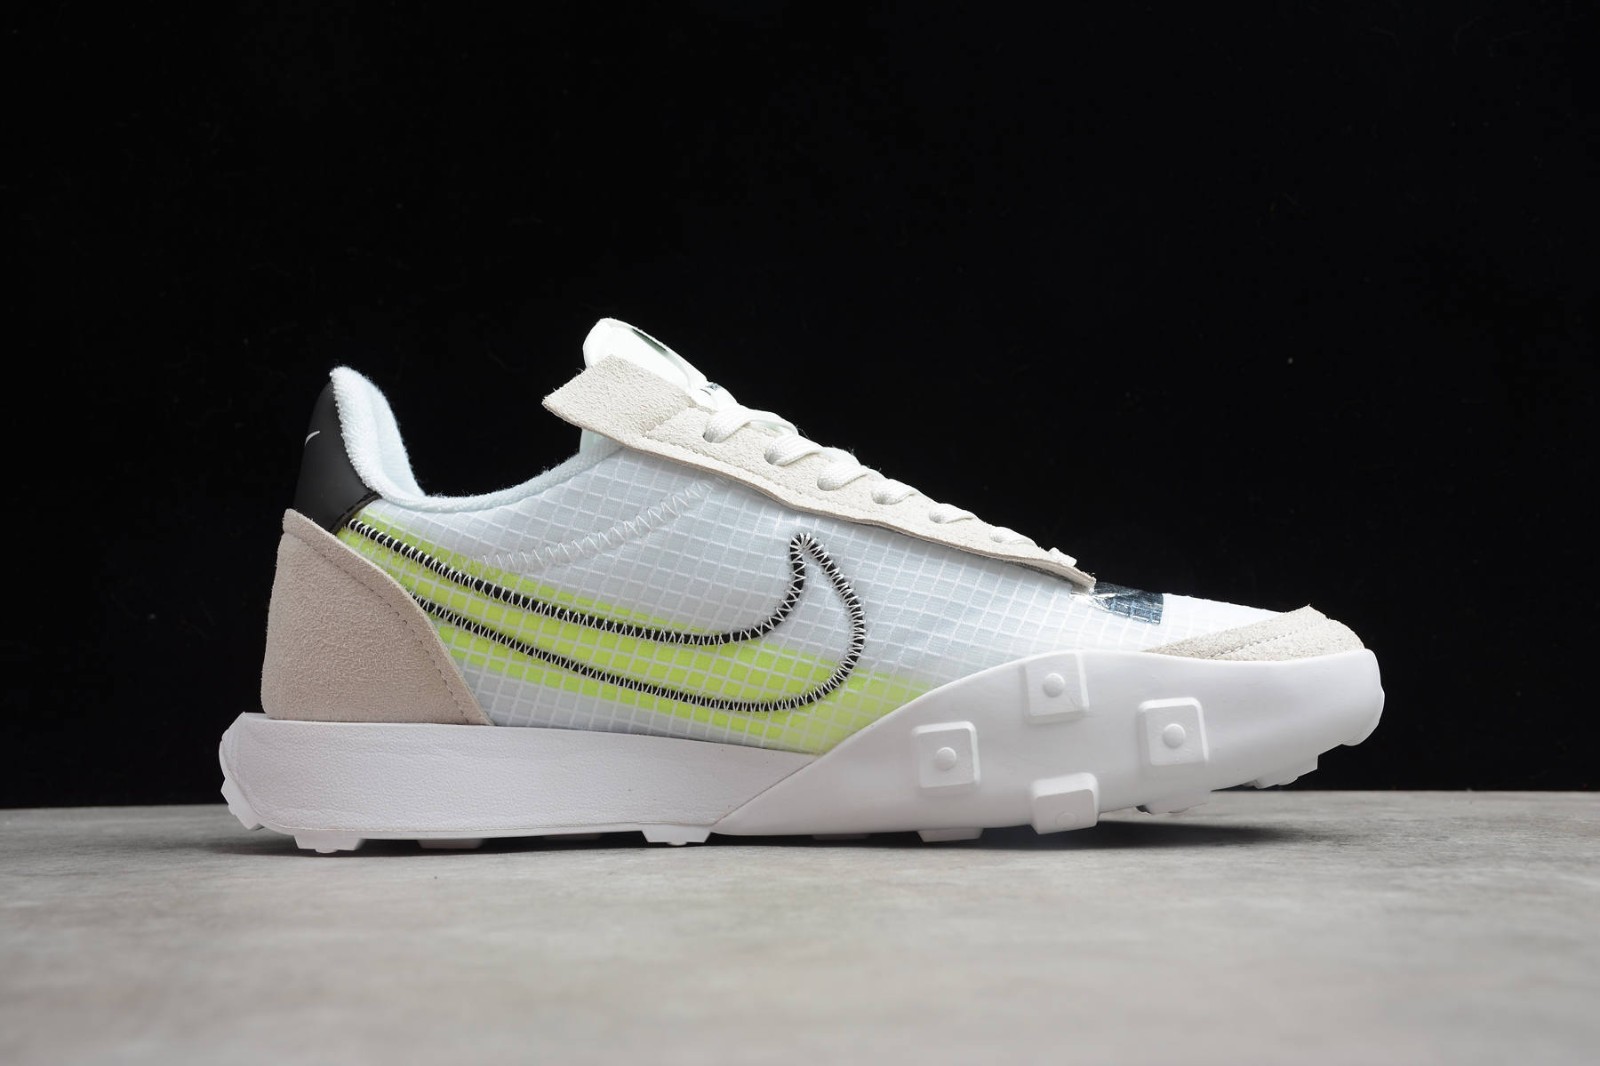 Familiar cortina evitar Adidas CEO Throws Shade at Nike s self-lacing sneakers - GmarShops - 100 -  2020 New Release Nike Waffle Racer 2.0 White Fluorescent Green Classic  Running Shoes CK6647